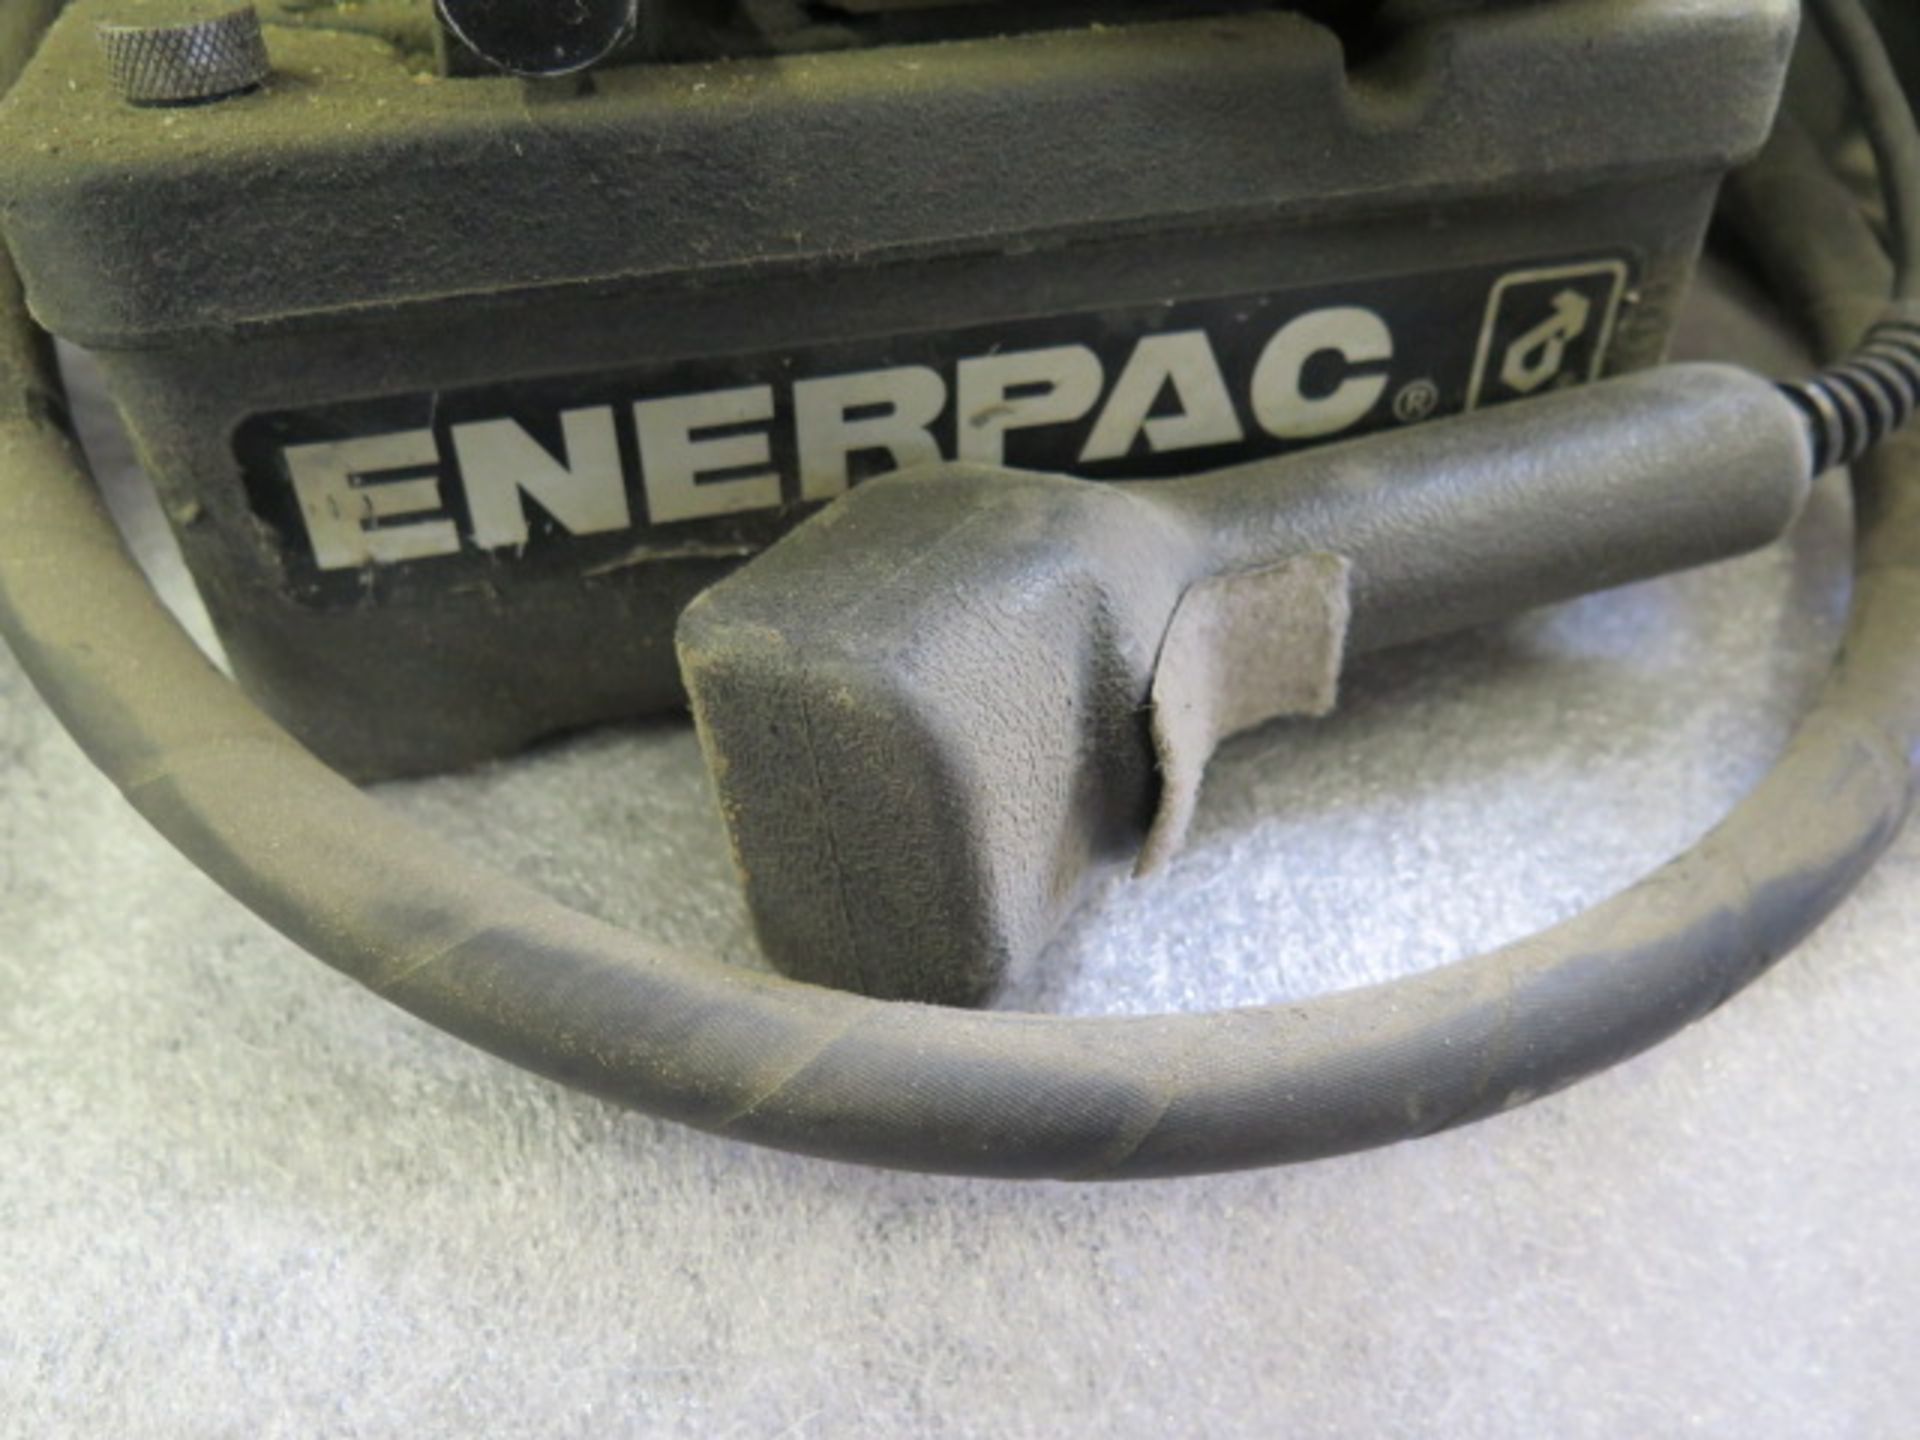 Enerpac mdl. PUJ1200B Electric Hudraulic Pump (SOLD AS-IS - NO WARRANTY) - Image 3 of 4